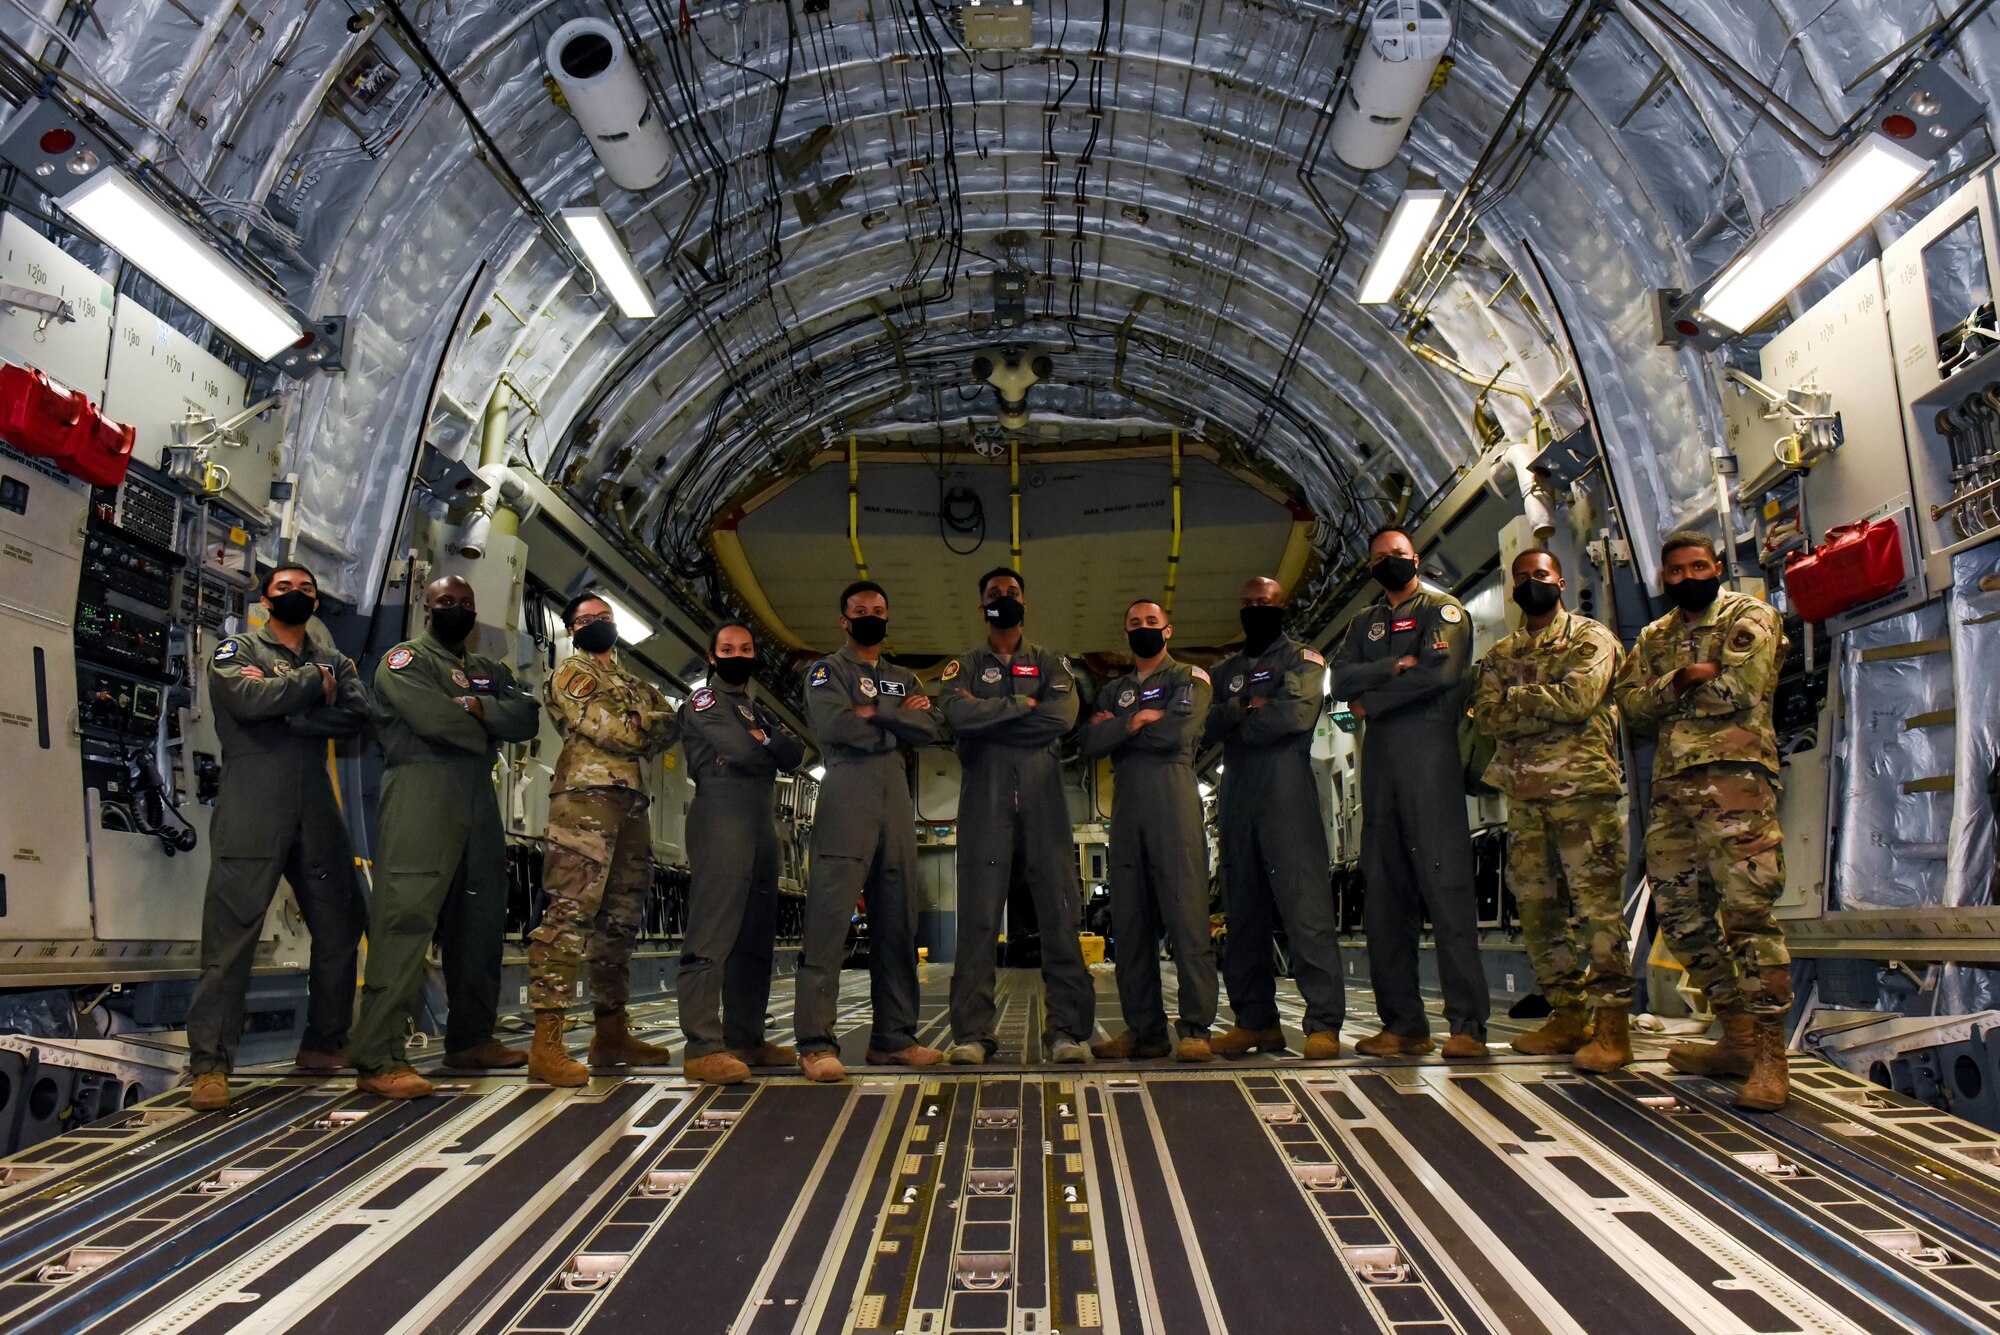 Eleven black air crew members from the 4th and 8th Airlift Squadrons, 62nd Operations Support Squadron, and the 62nd Aircraft Maintenance Squadron on Joint Base Lewis-McChord, Wash., pose at the back of a C-17 Globemaster III after completing a successful training flight and attending a heritage event for Black History Month, honoring the history and supporting the future of black Airmen. (U.S. Air Force photo by Senior Airman Mikayla Heineck)